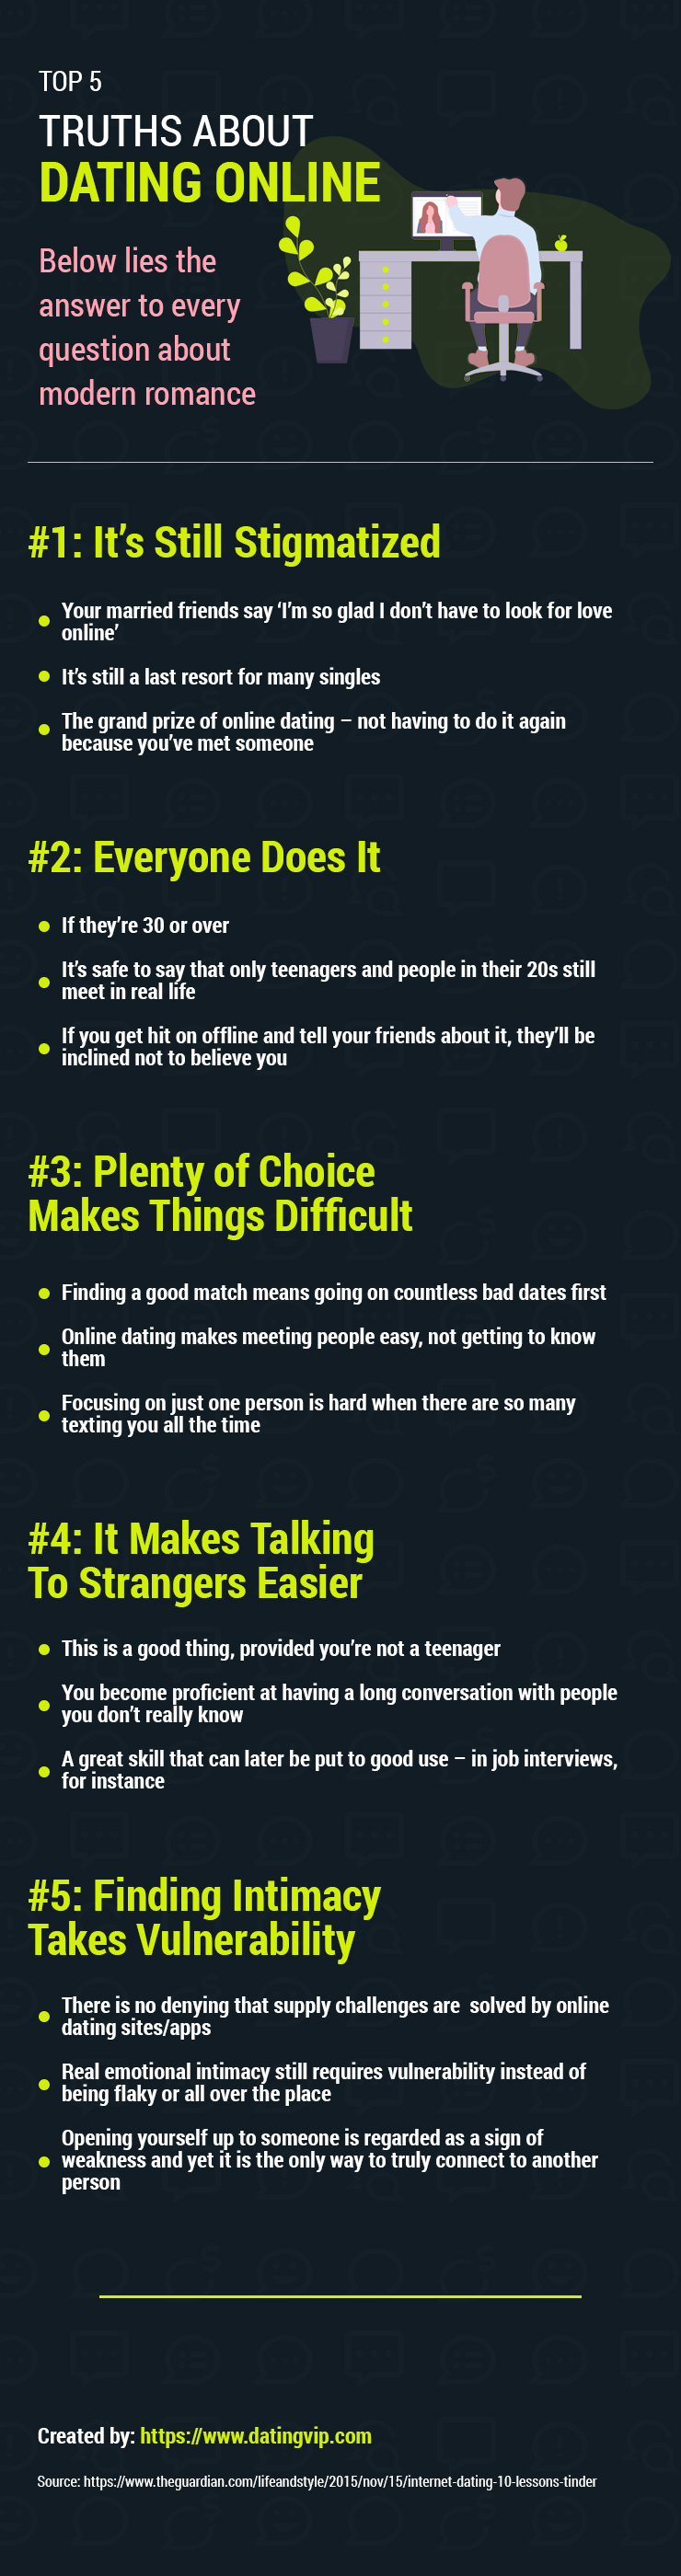 Top 5 Truths About Dating Online